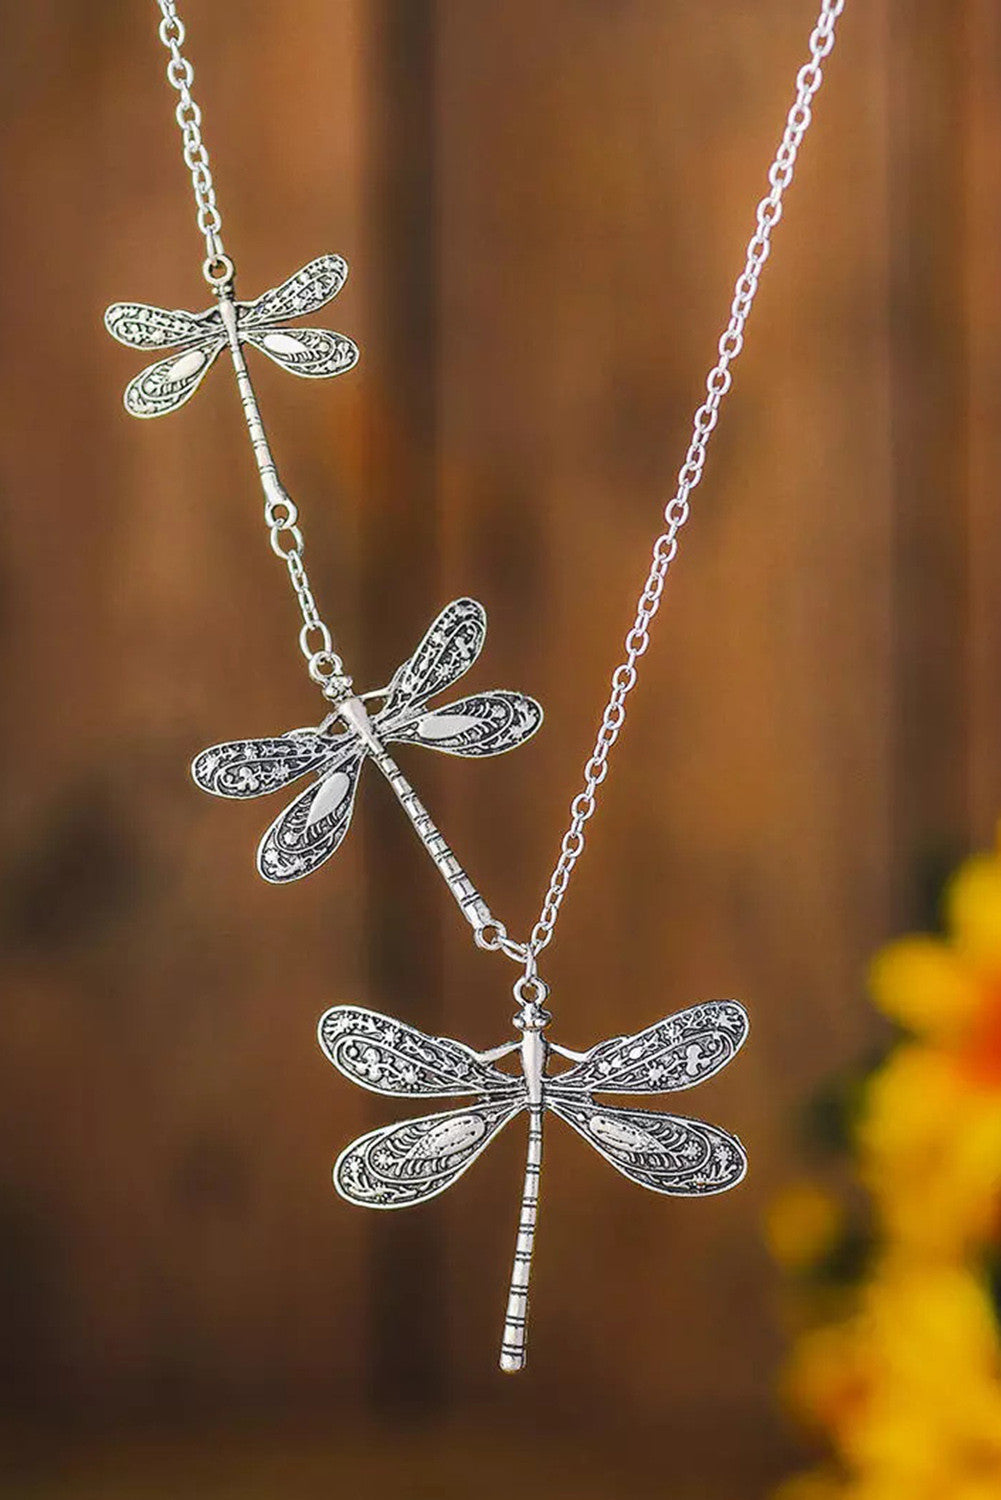 Buy Sterling Silver Dragonfly Necklace Dragonfly Jewelry Dragonflies  Detailed Dragonfly Pendant Gifts for Her Birthday Remembrance Online in  India - Etsy